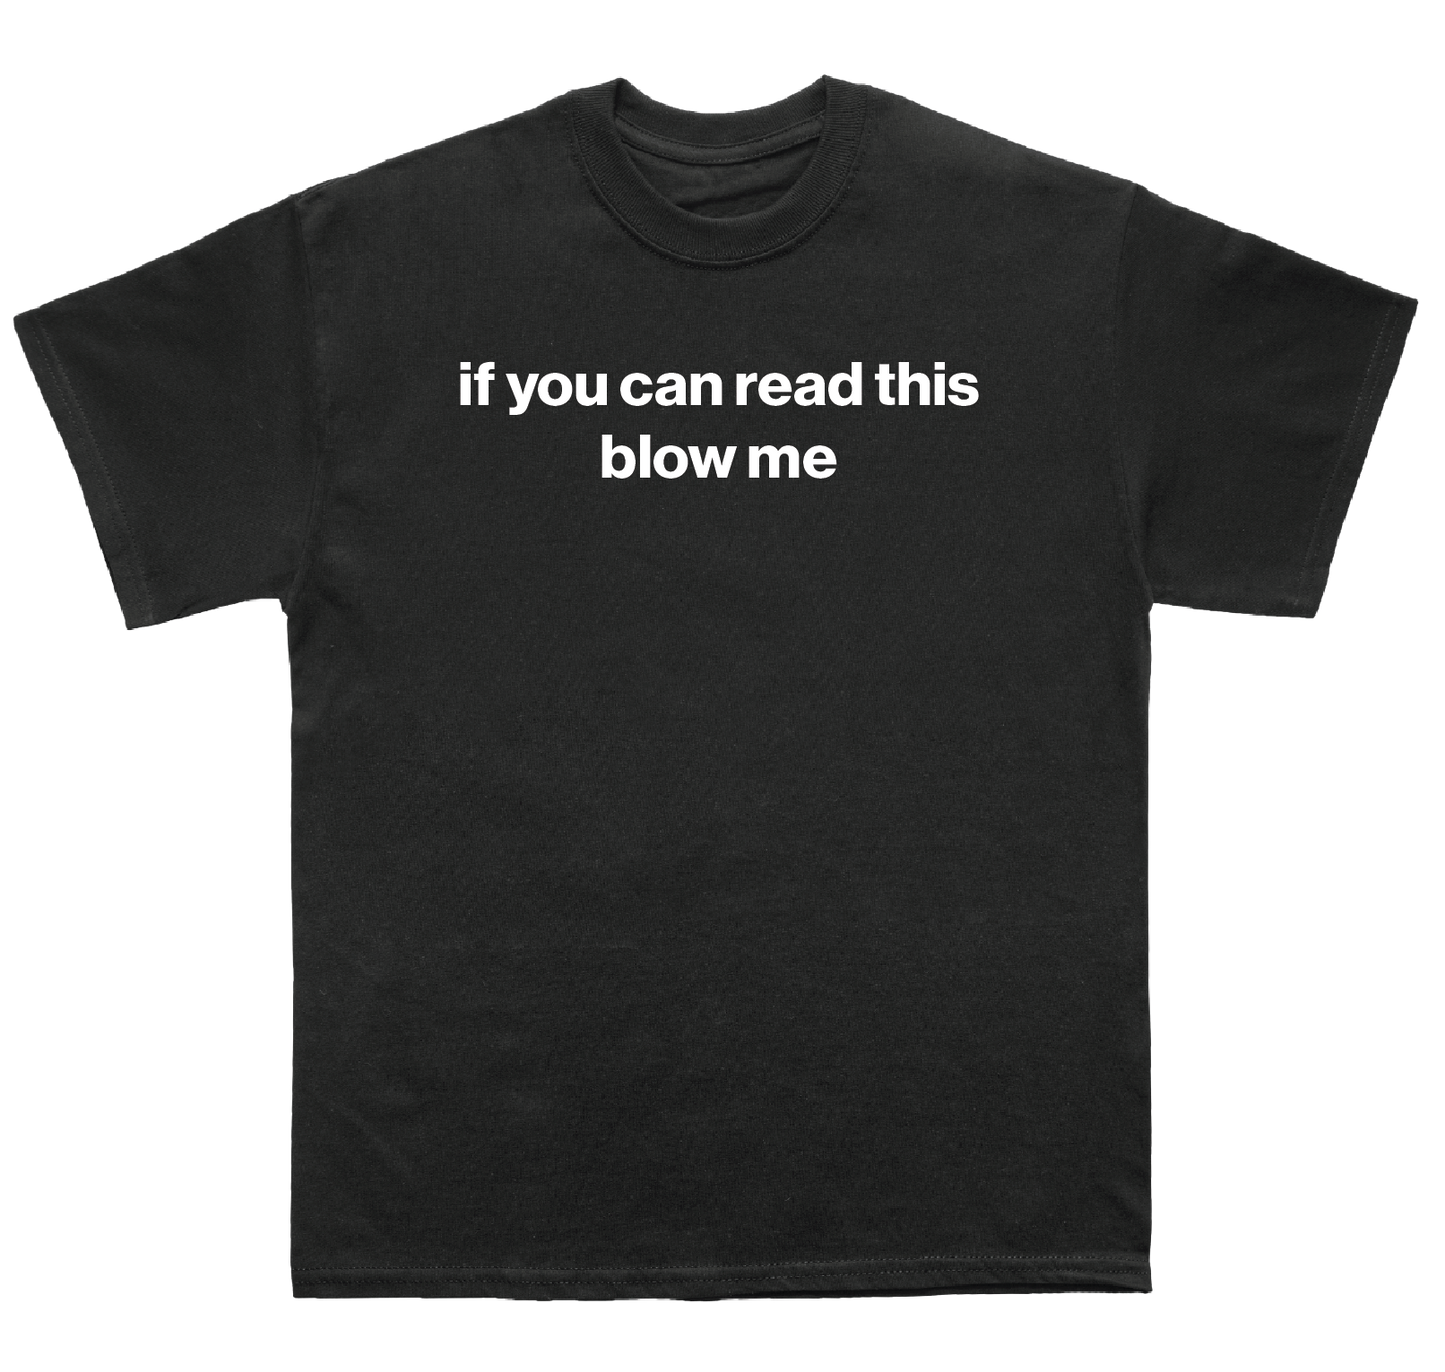 if you can read this blow me shirt